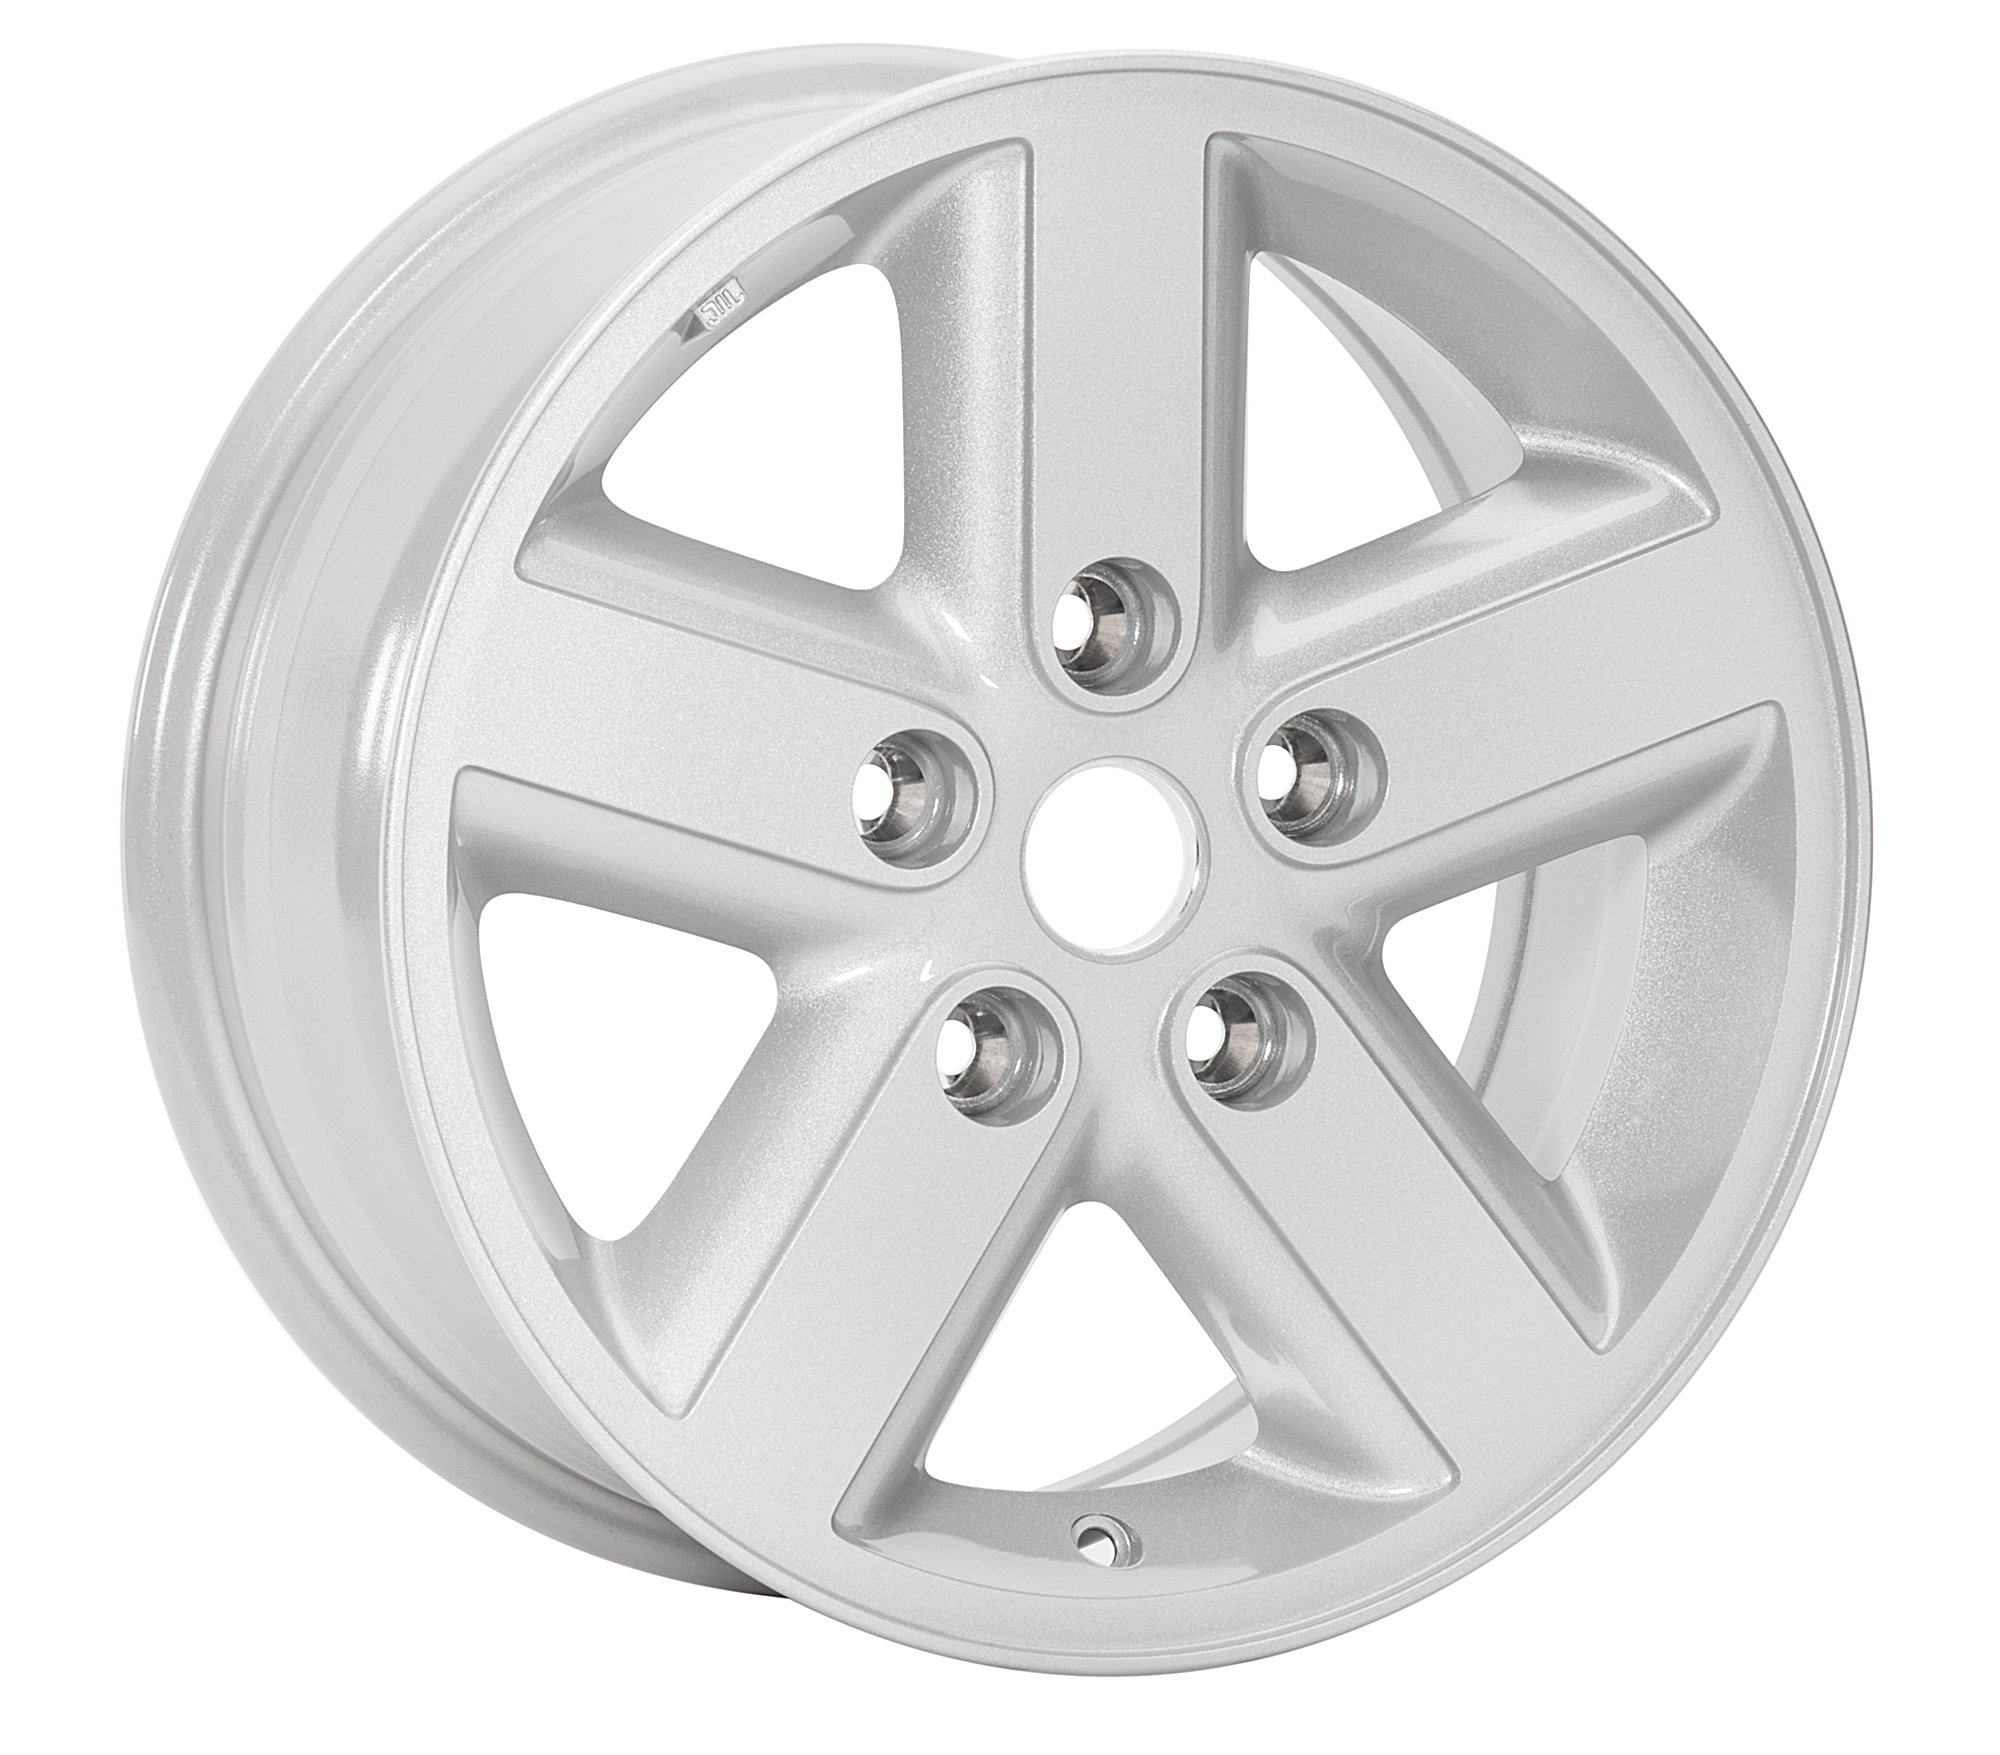 Mopar 1AH77PAKAB Lux Wheel in Silver for 07-08 Jeep Wrangler and Wrangler  Unlimited JK | Quadratec